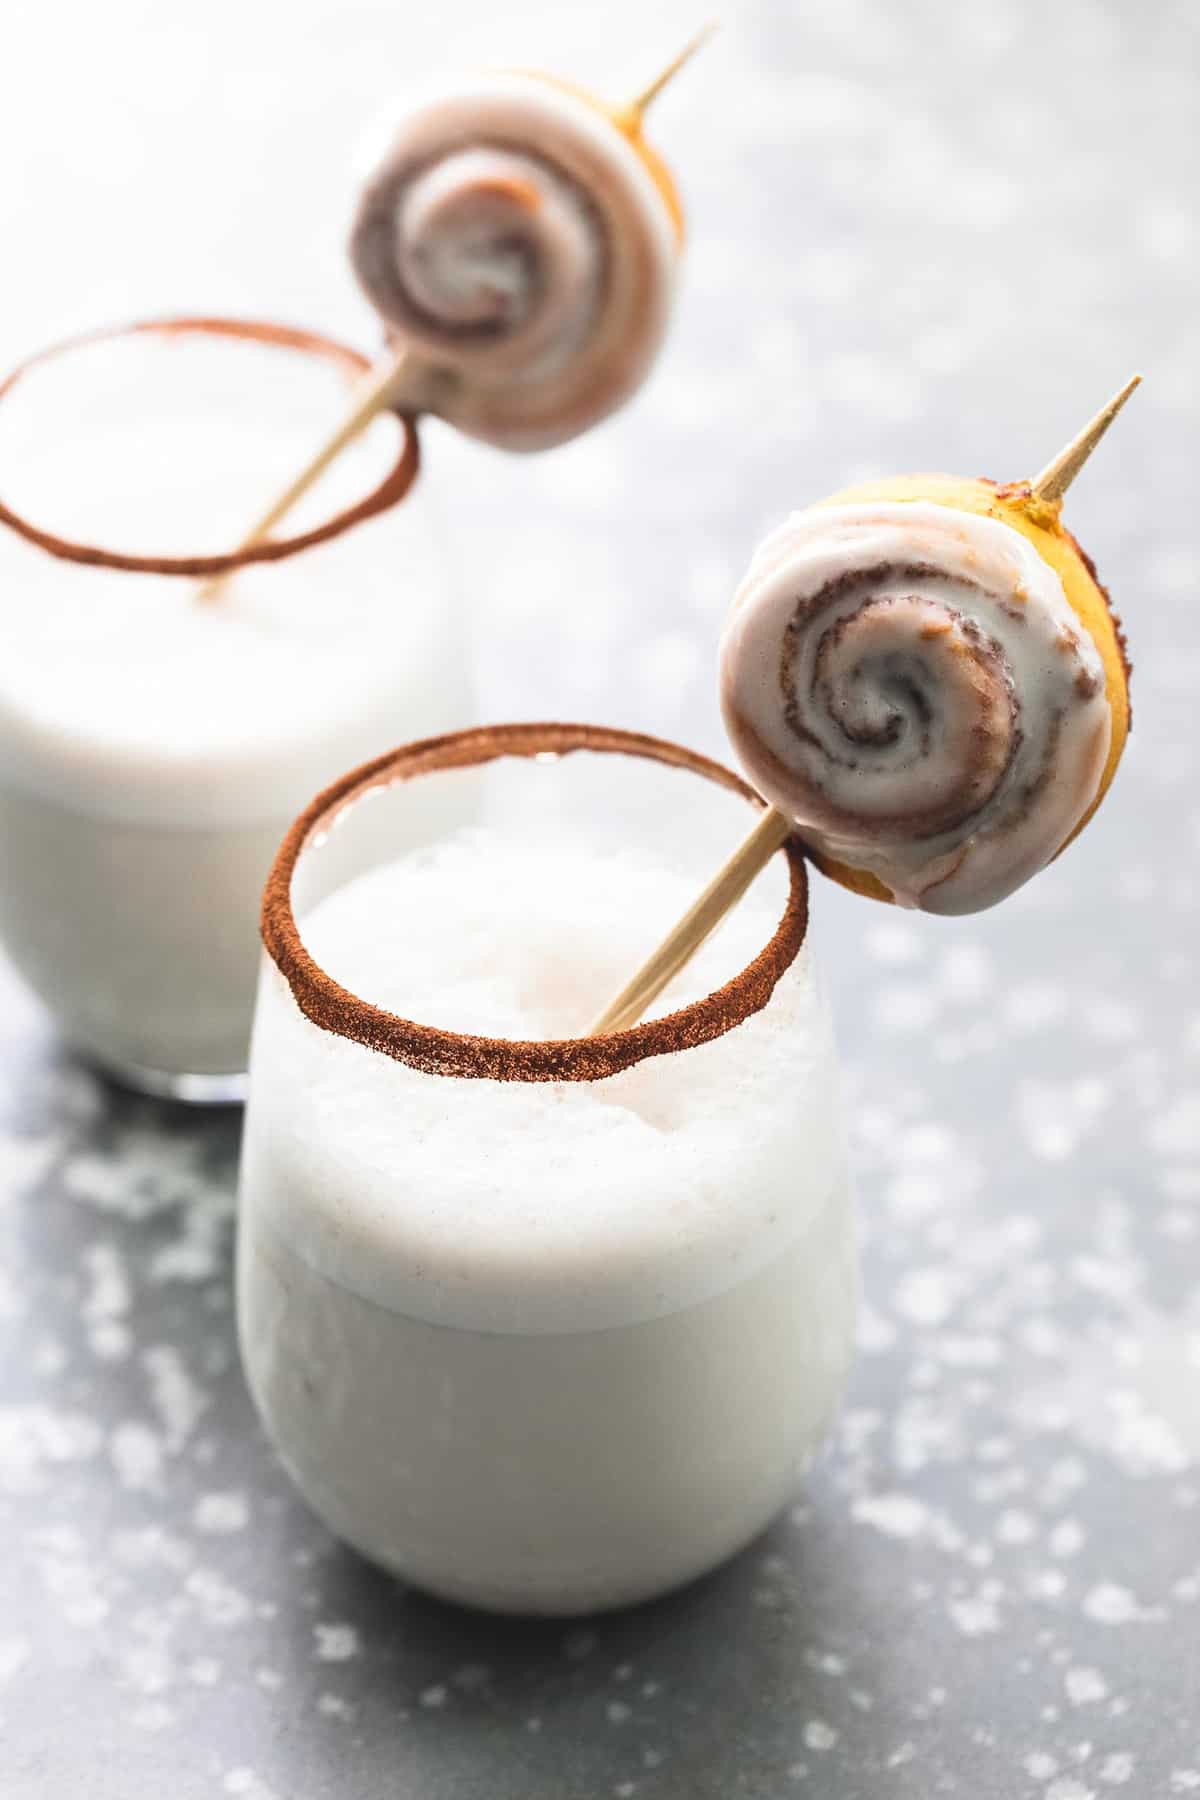 glasses of cinnamon bun moon milk with a mini cinnamon roll on a stick sitting in it with cinnamon around the ring of the glasses.